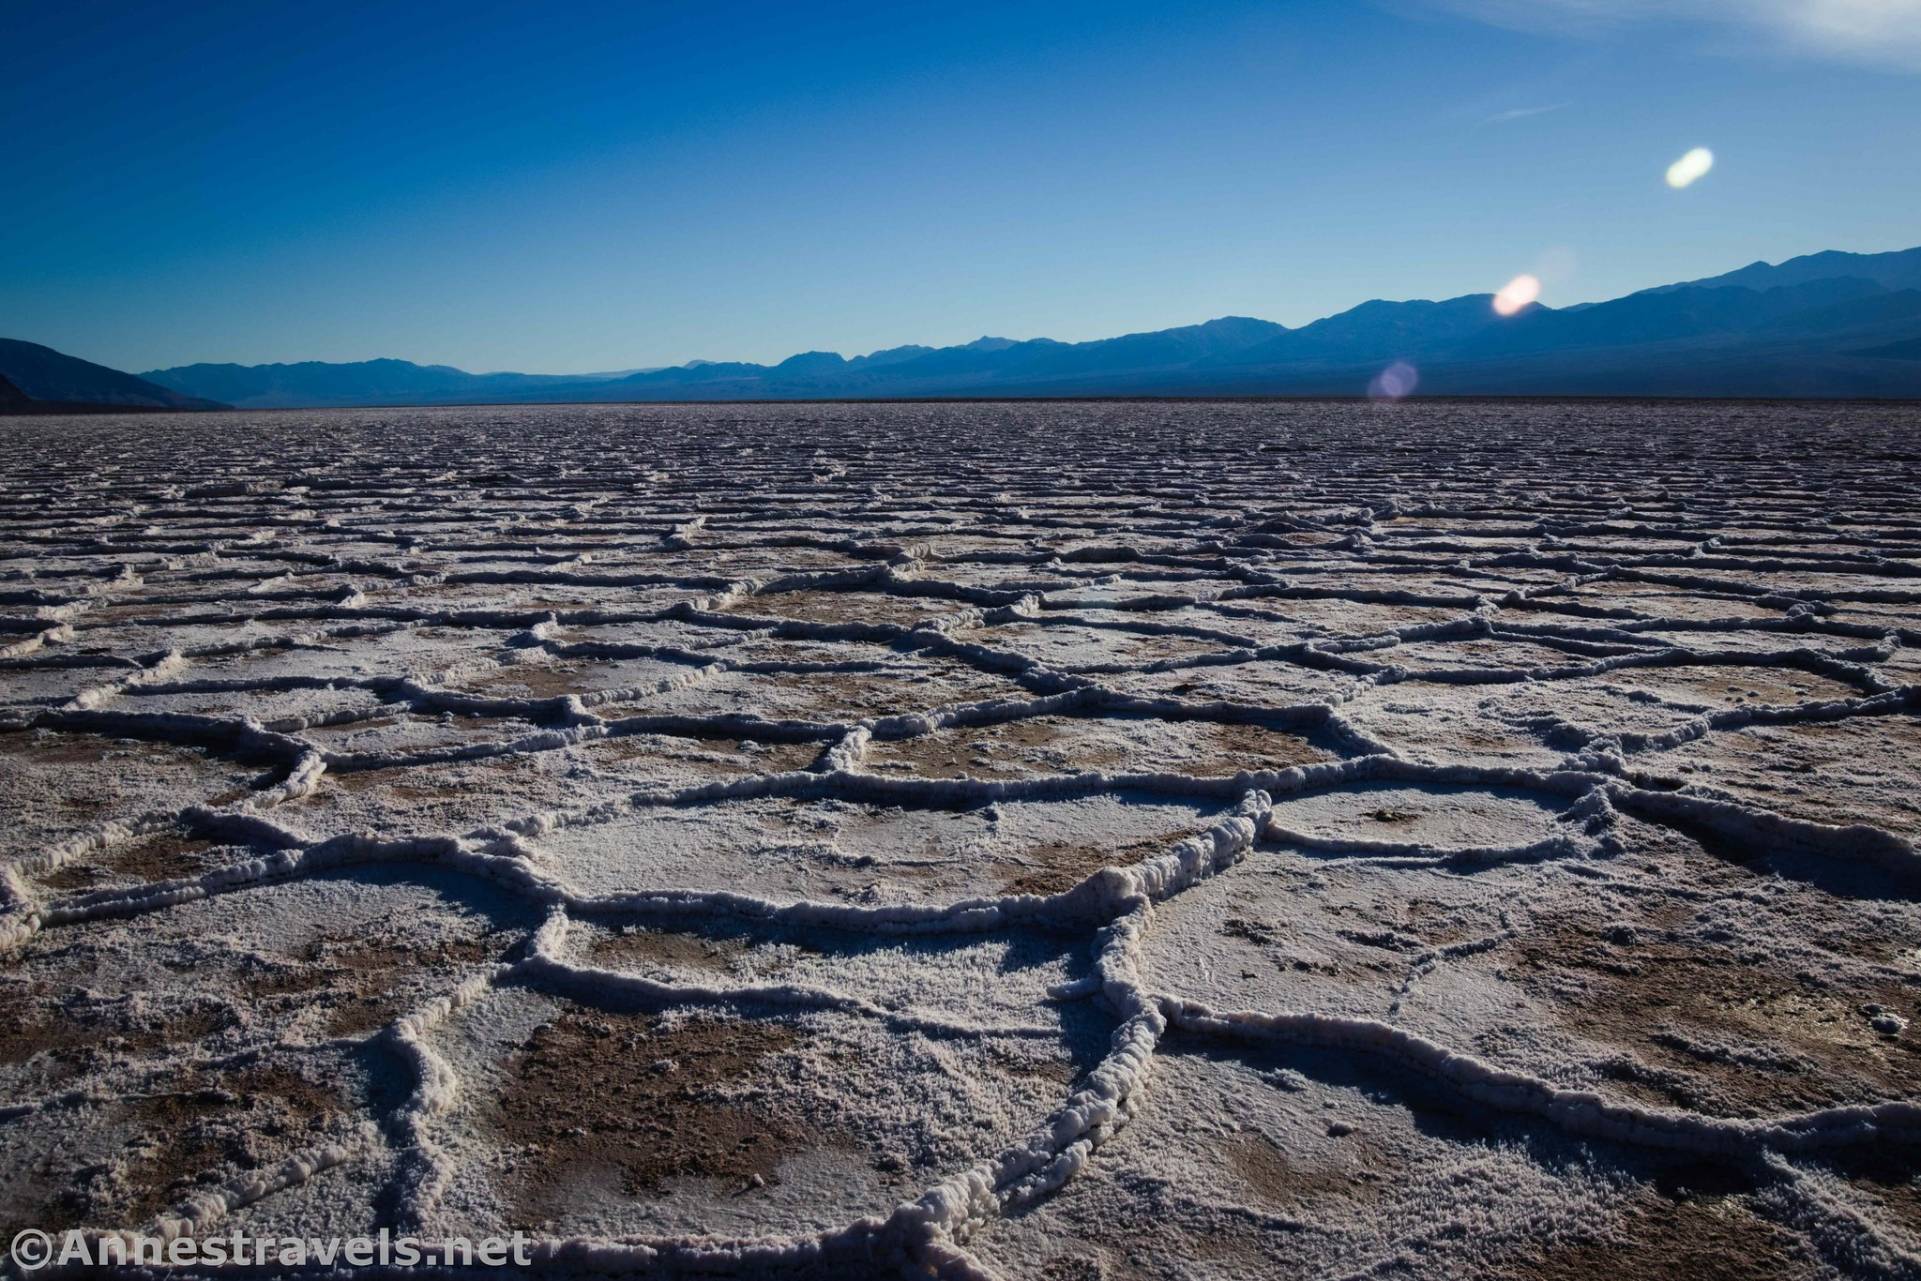 Views south from Badwater Flats, Death Valley National Park, California